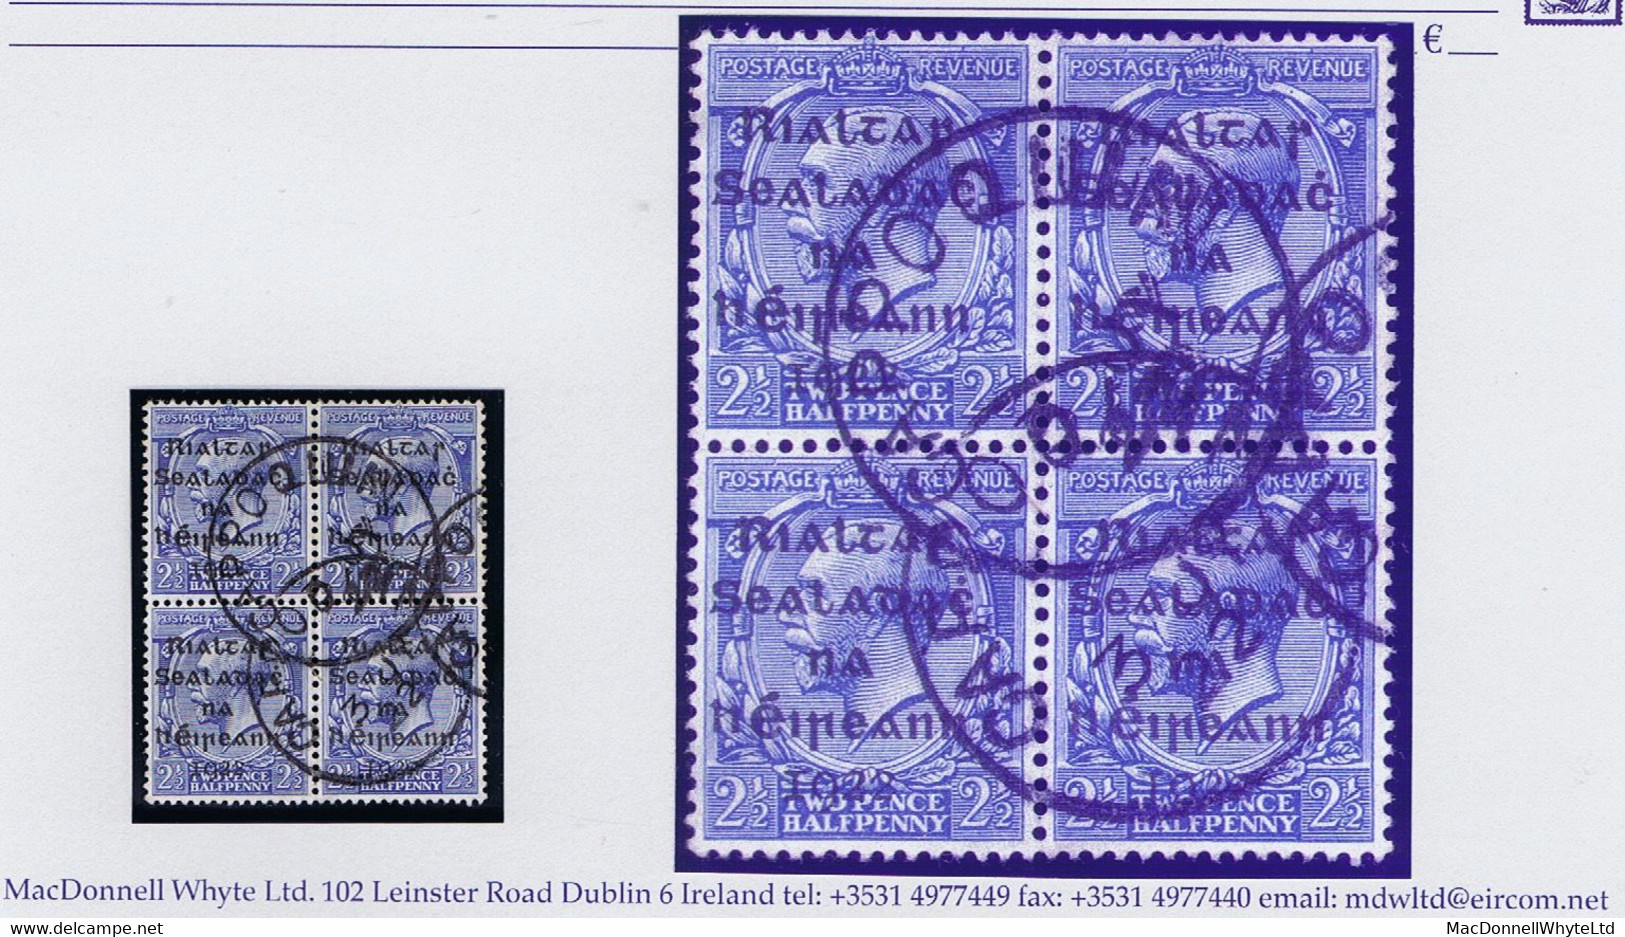 Ireland Waterford 1922 Dollard Rialtas Ovpt In Black On 2½d Blue, Block Of 4 Used Neat CAPPOQUIN 3 JY 22 Cds - Used Stamps